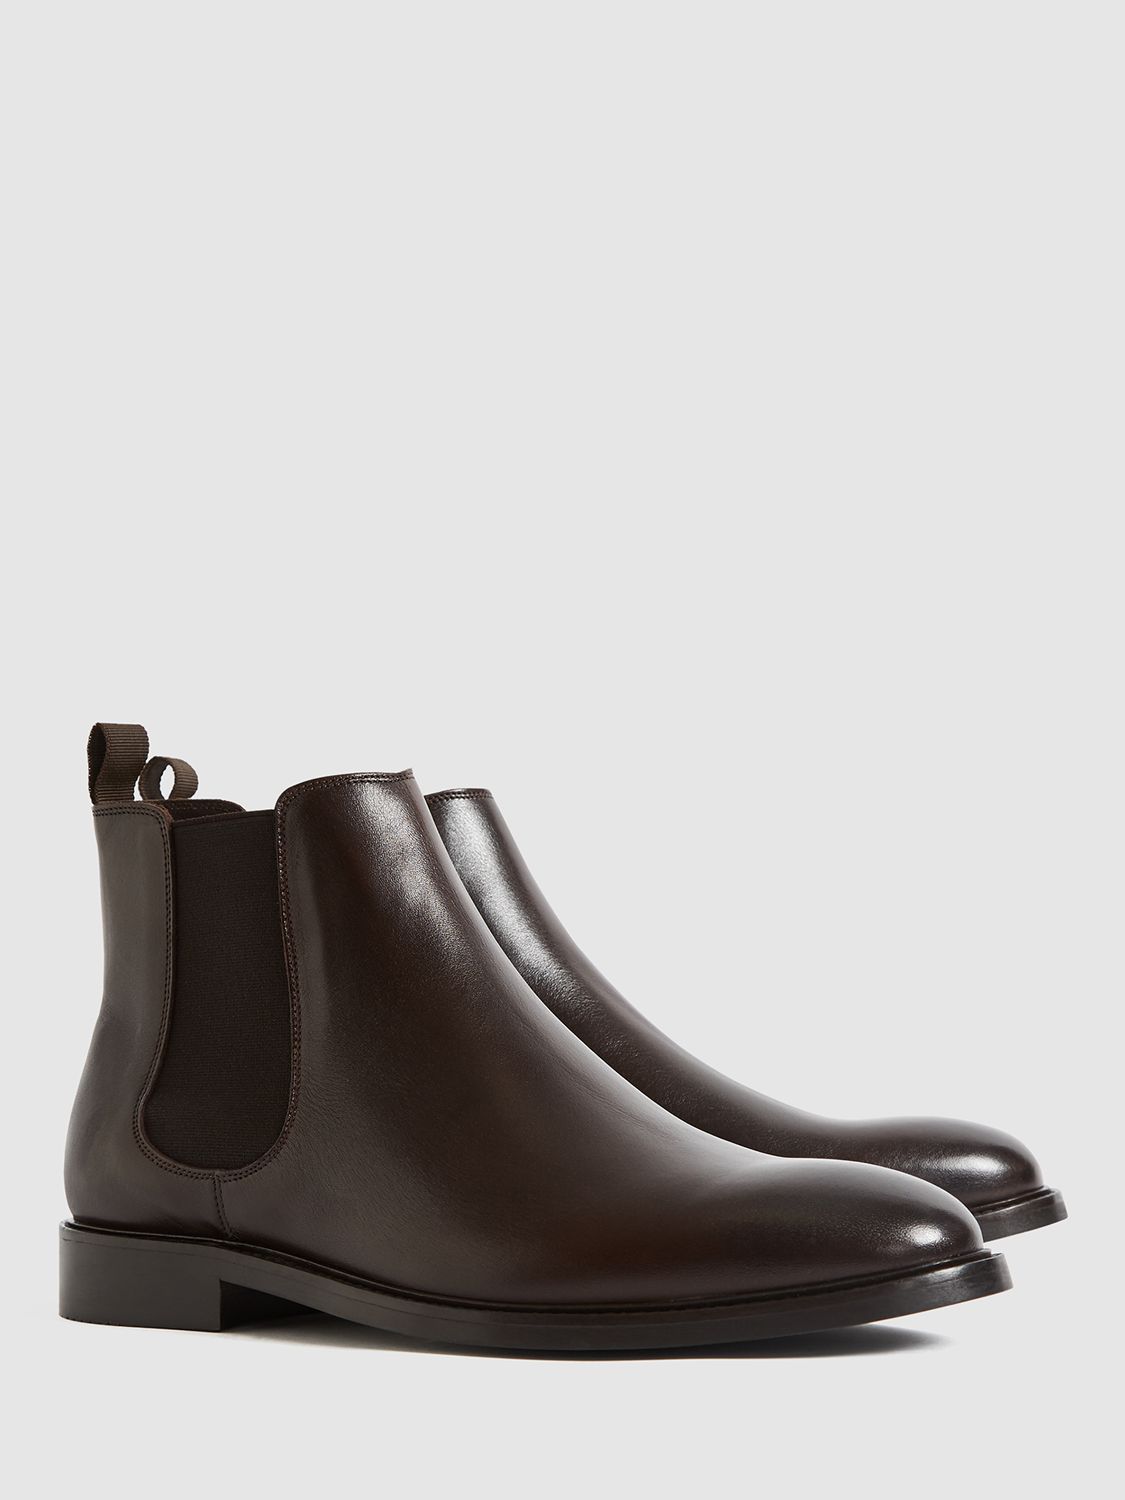 Reiss Tenor Leather Chelsea Boots, Black at John Lewis & Partners